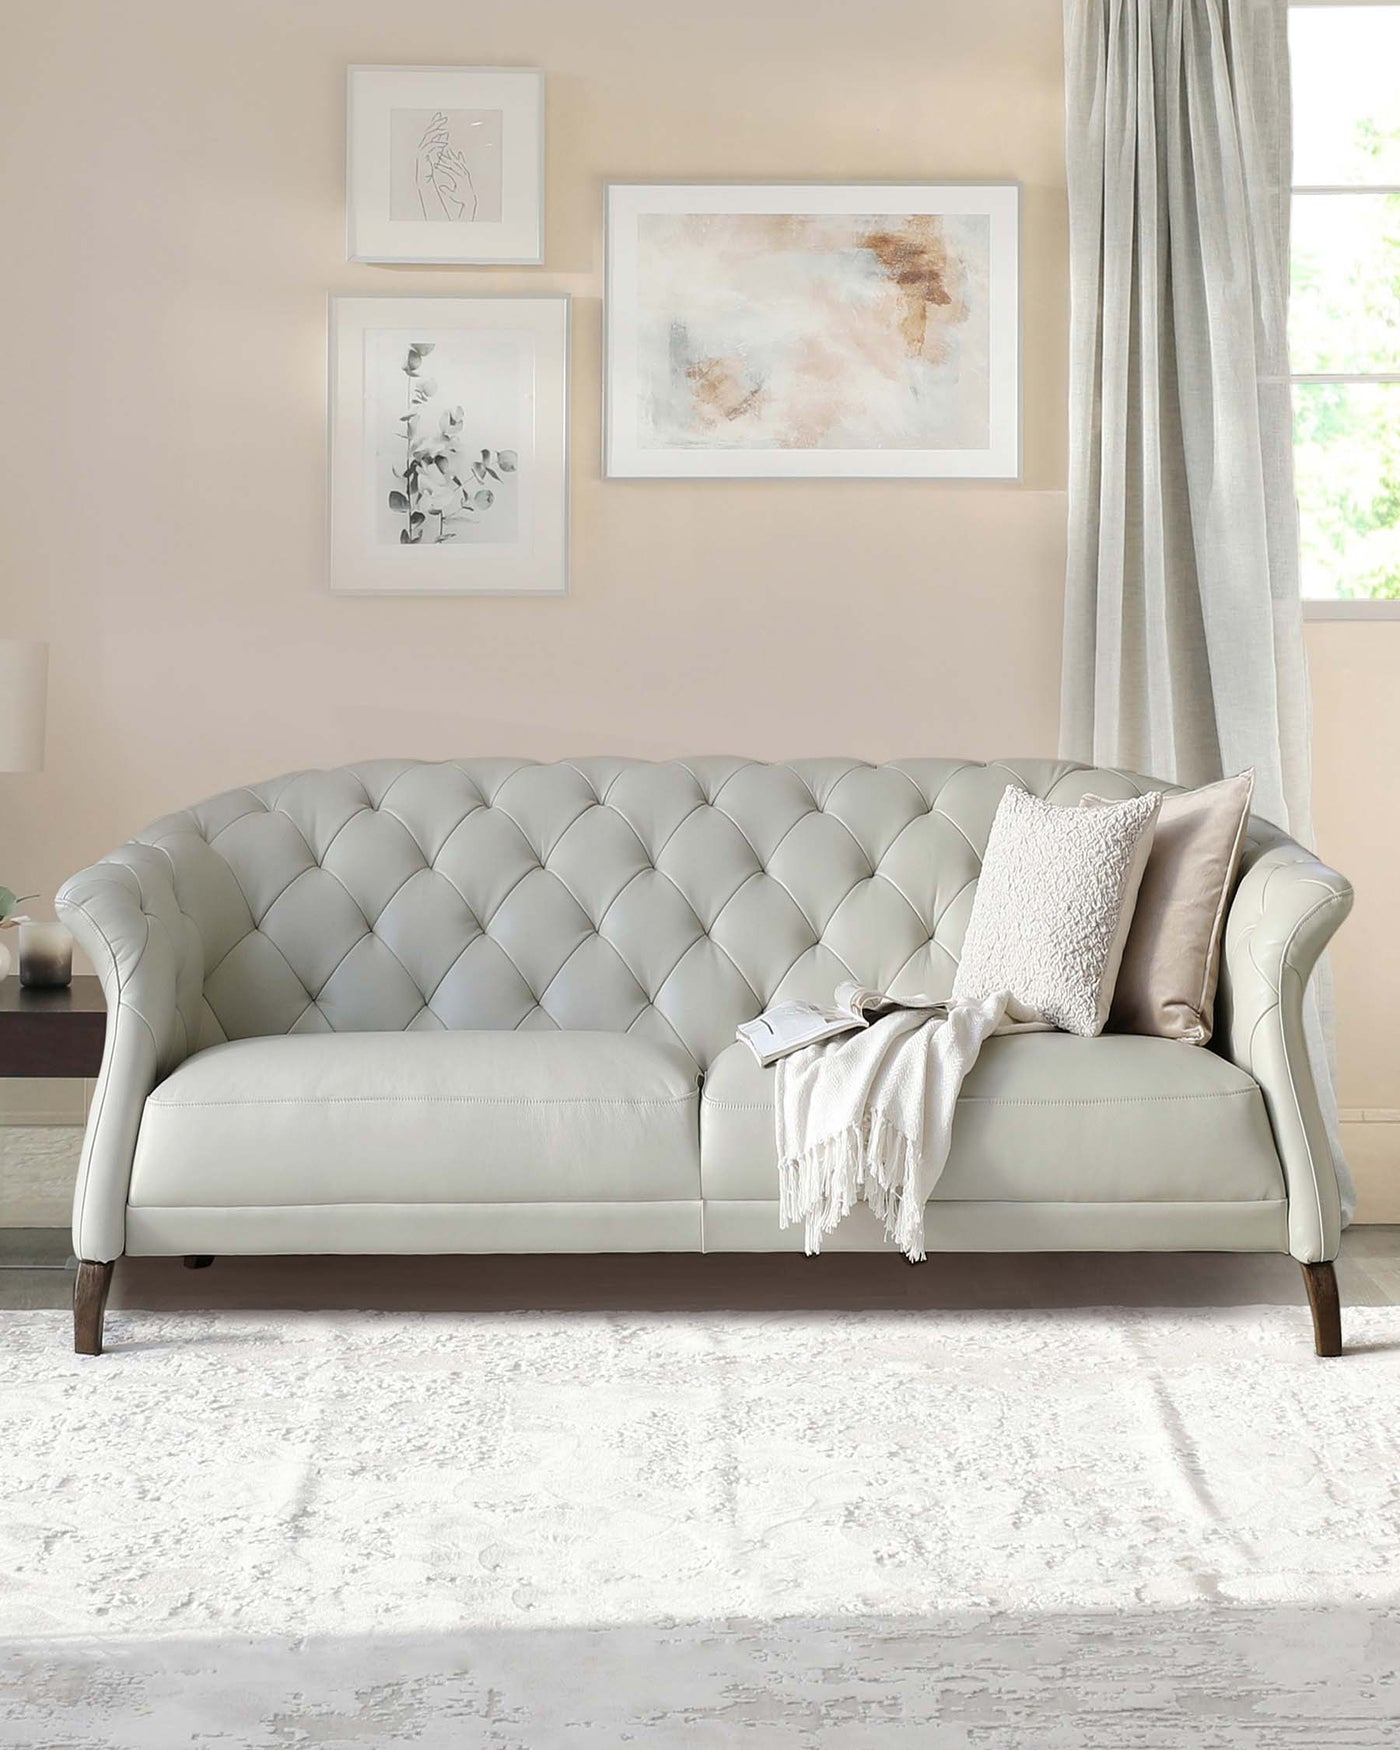 Elegant ivory tufted chesterfield sofa with a curved backrest, accented with a light grey throw and a textured decorative pillow resting on one side. The sofa has dark wooden legs and is placed on a textured white area rug, set against a light beige wall embellished with framed abstract artwork.